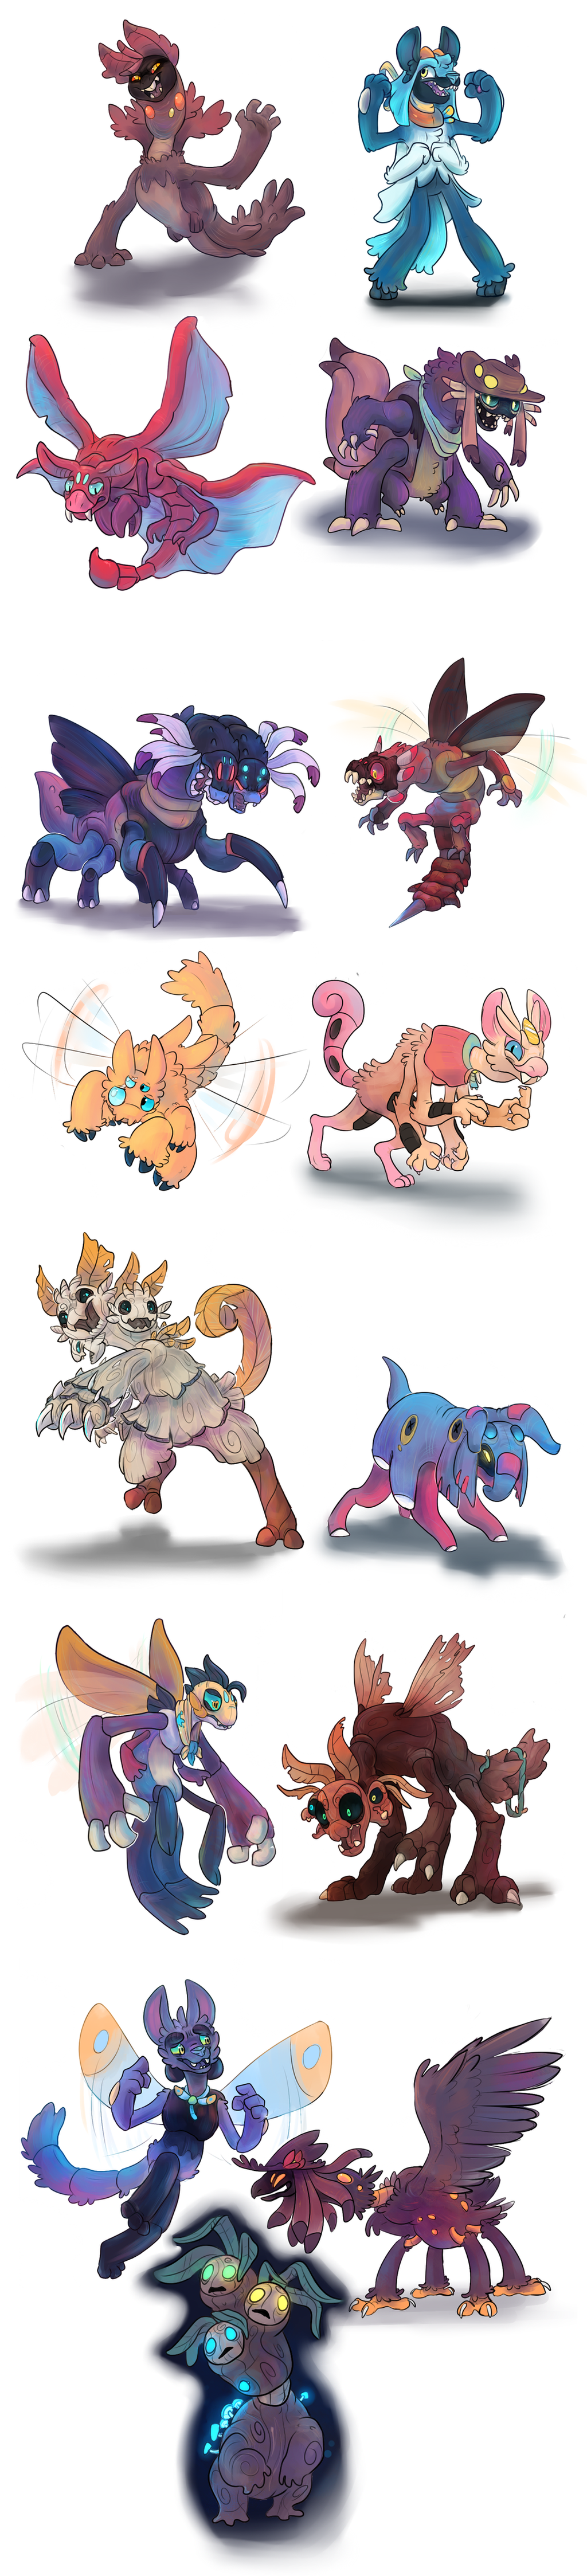 PMD Fusion Collection by Srarlight on DeviantArt